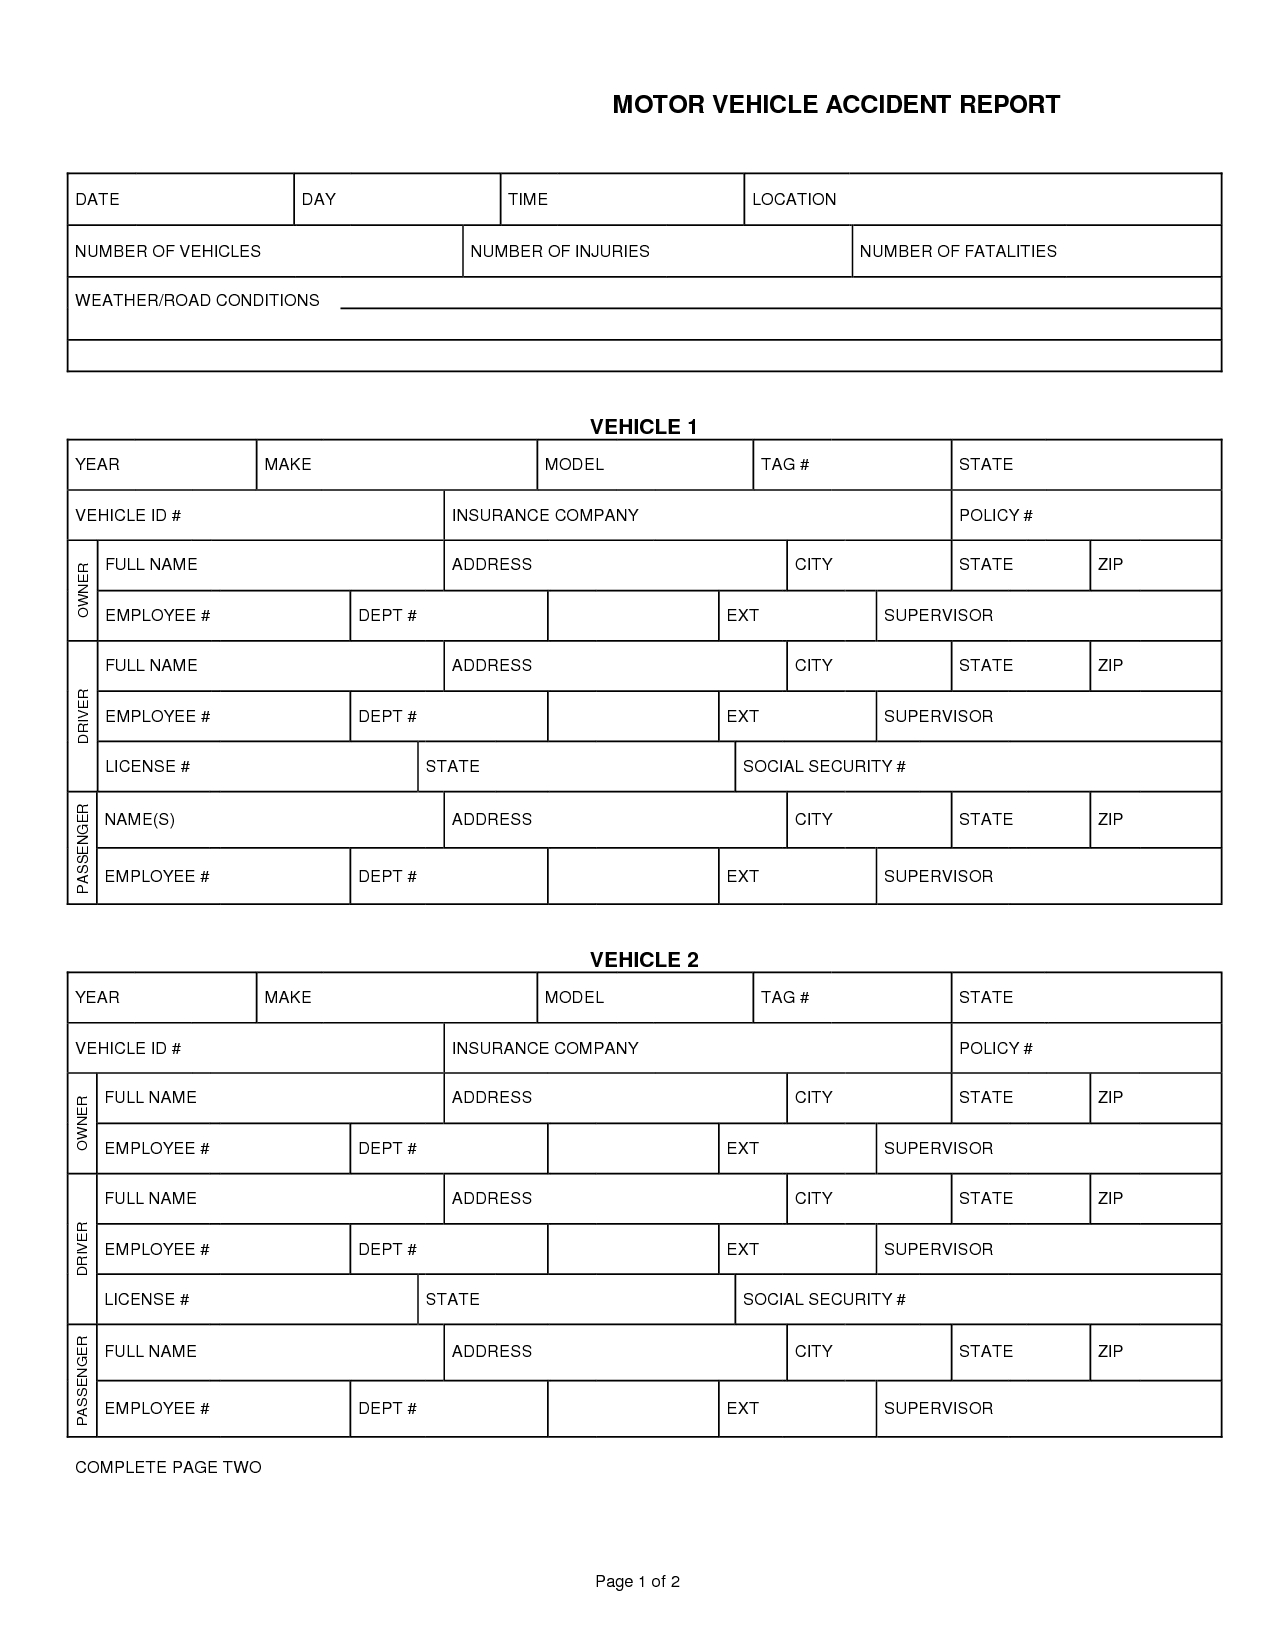 008 Car Accident Report Form Template 290132 Vehicle Throughout Motor Vehicle Accident Report Form Template